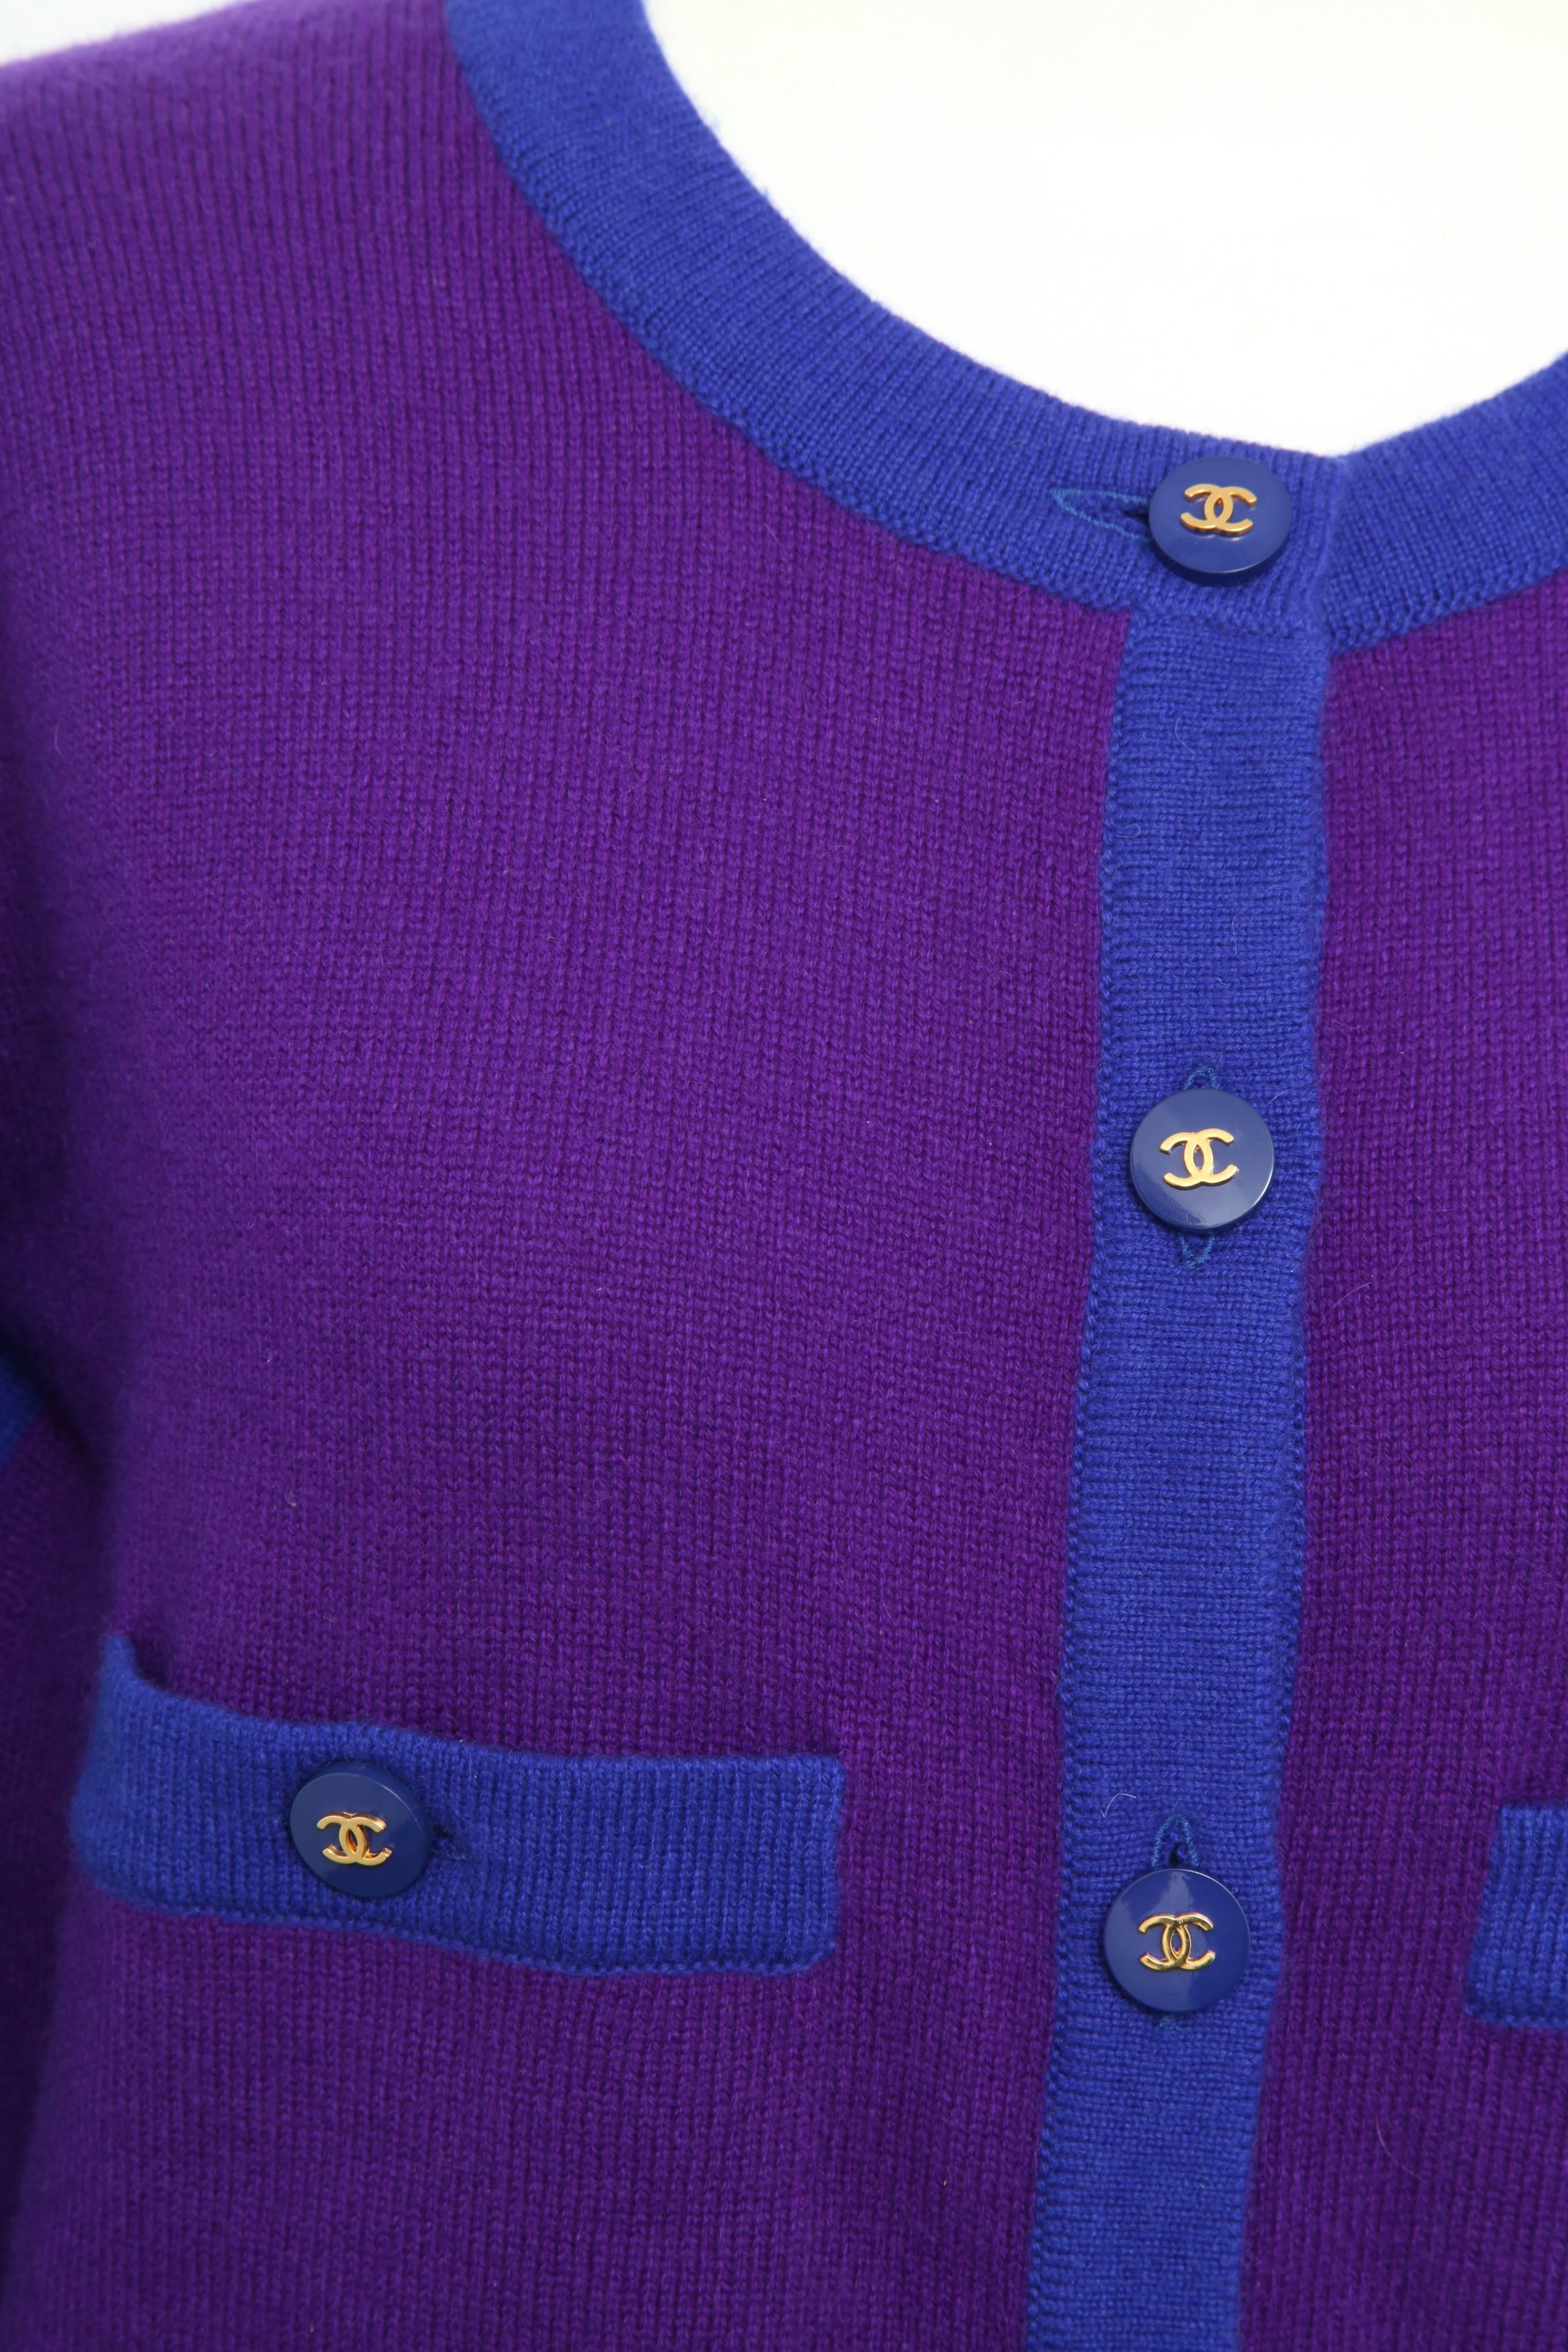 Very rare, beautiful Chanel cashmere cardigan sweater with CC buttons. Size 38.